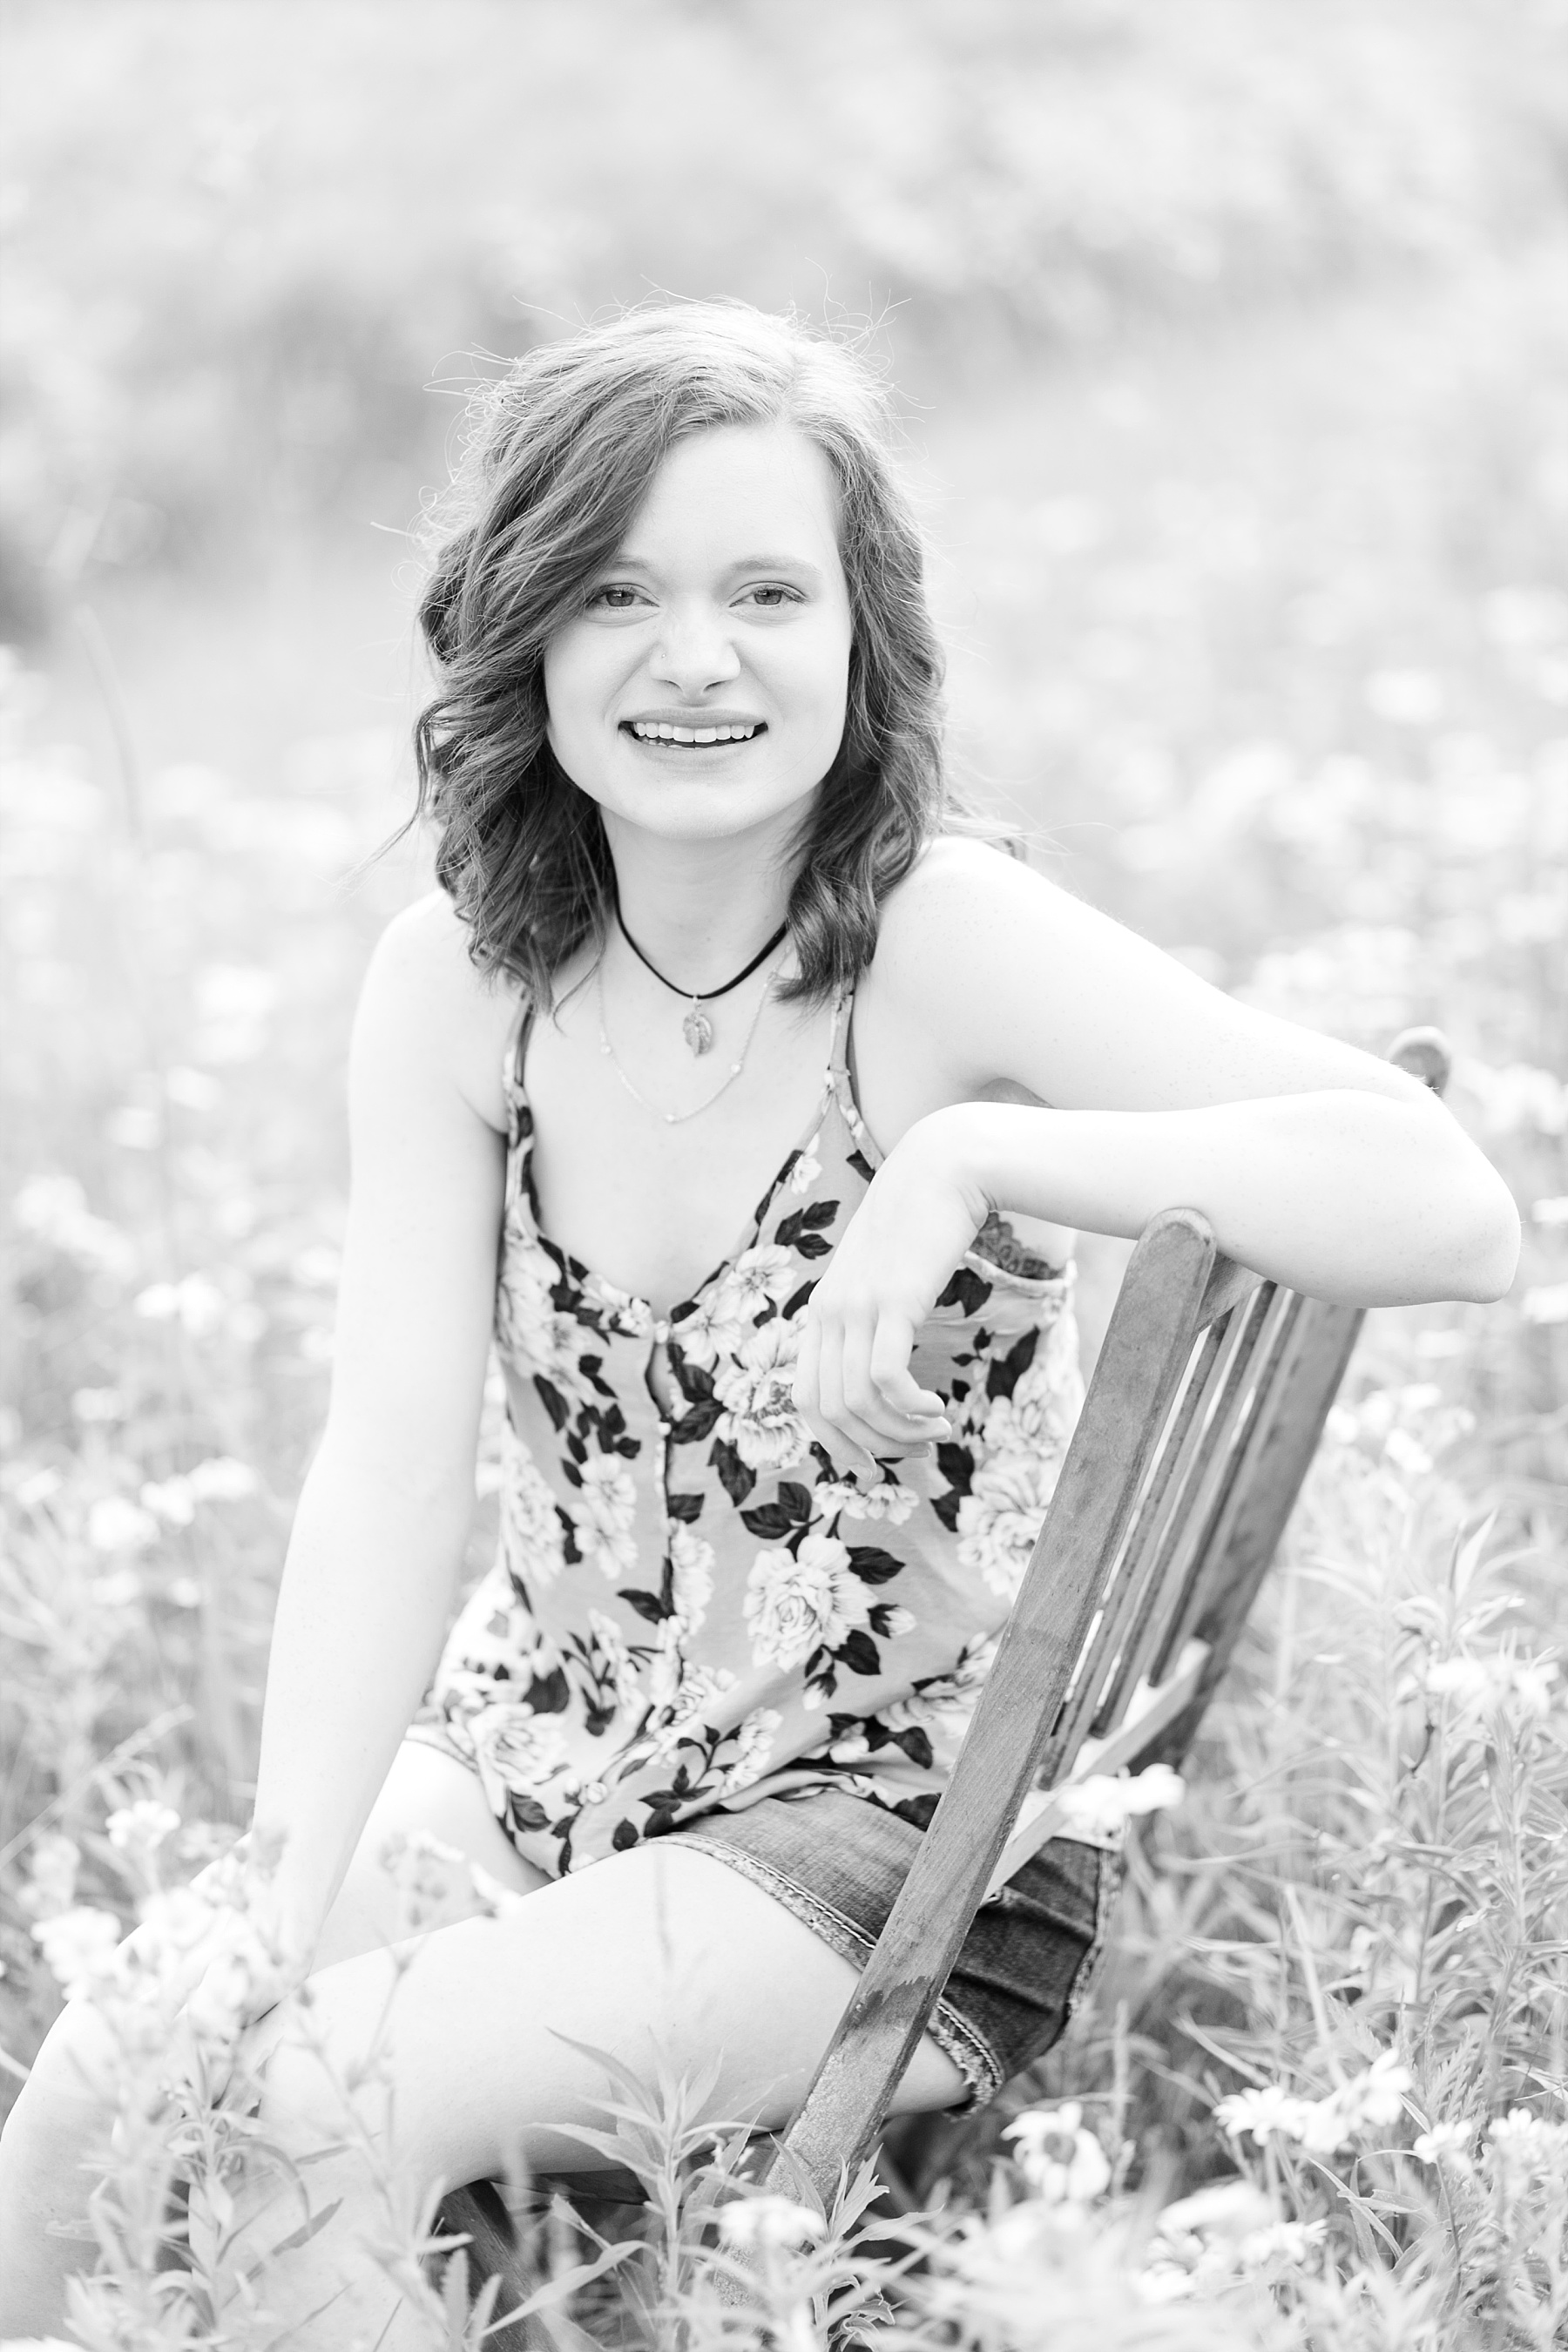 A little bit of sunshine and fields of flowers were perfect for Marissa's Lake Wissota State Park senior photos.